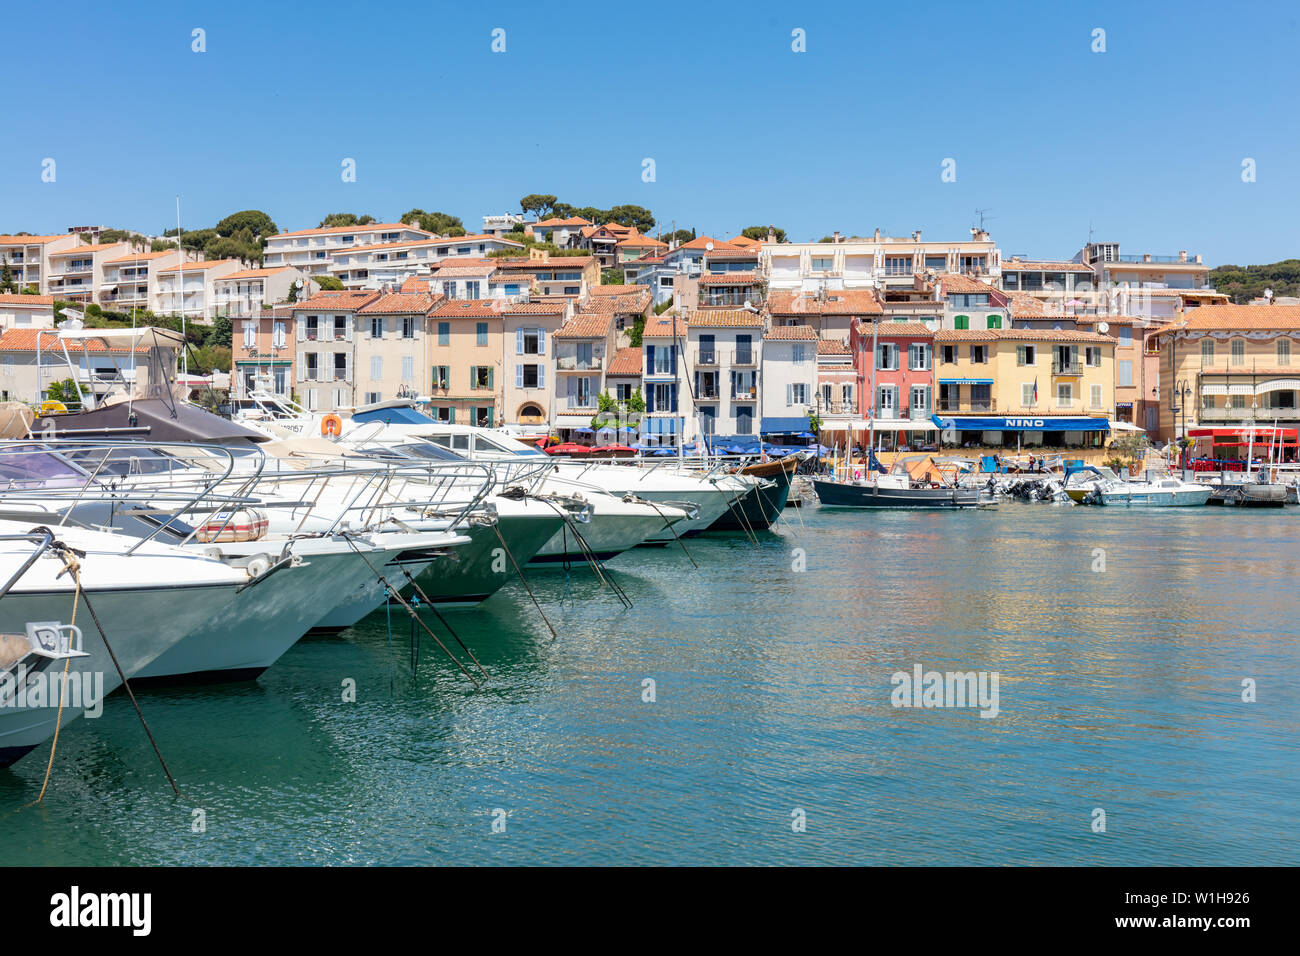 Cassis, France; 22nd June 2019; Leisure Boats Lined Up in the Harbour With Colourful Buildings Behind Stock Photo